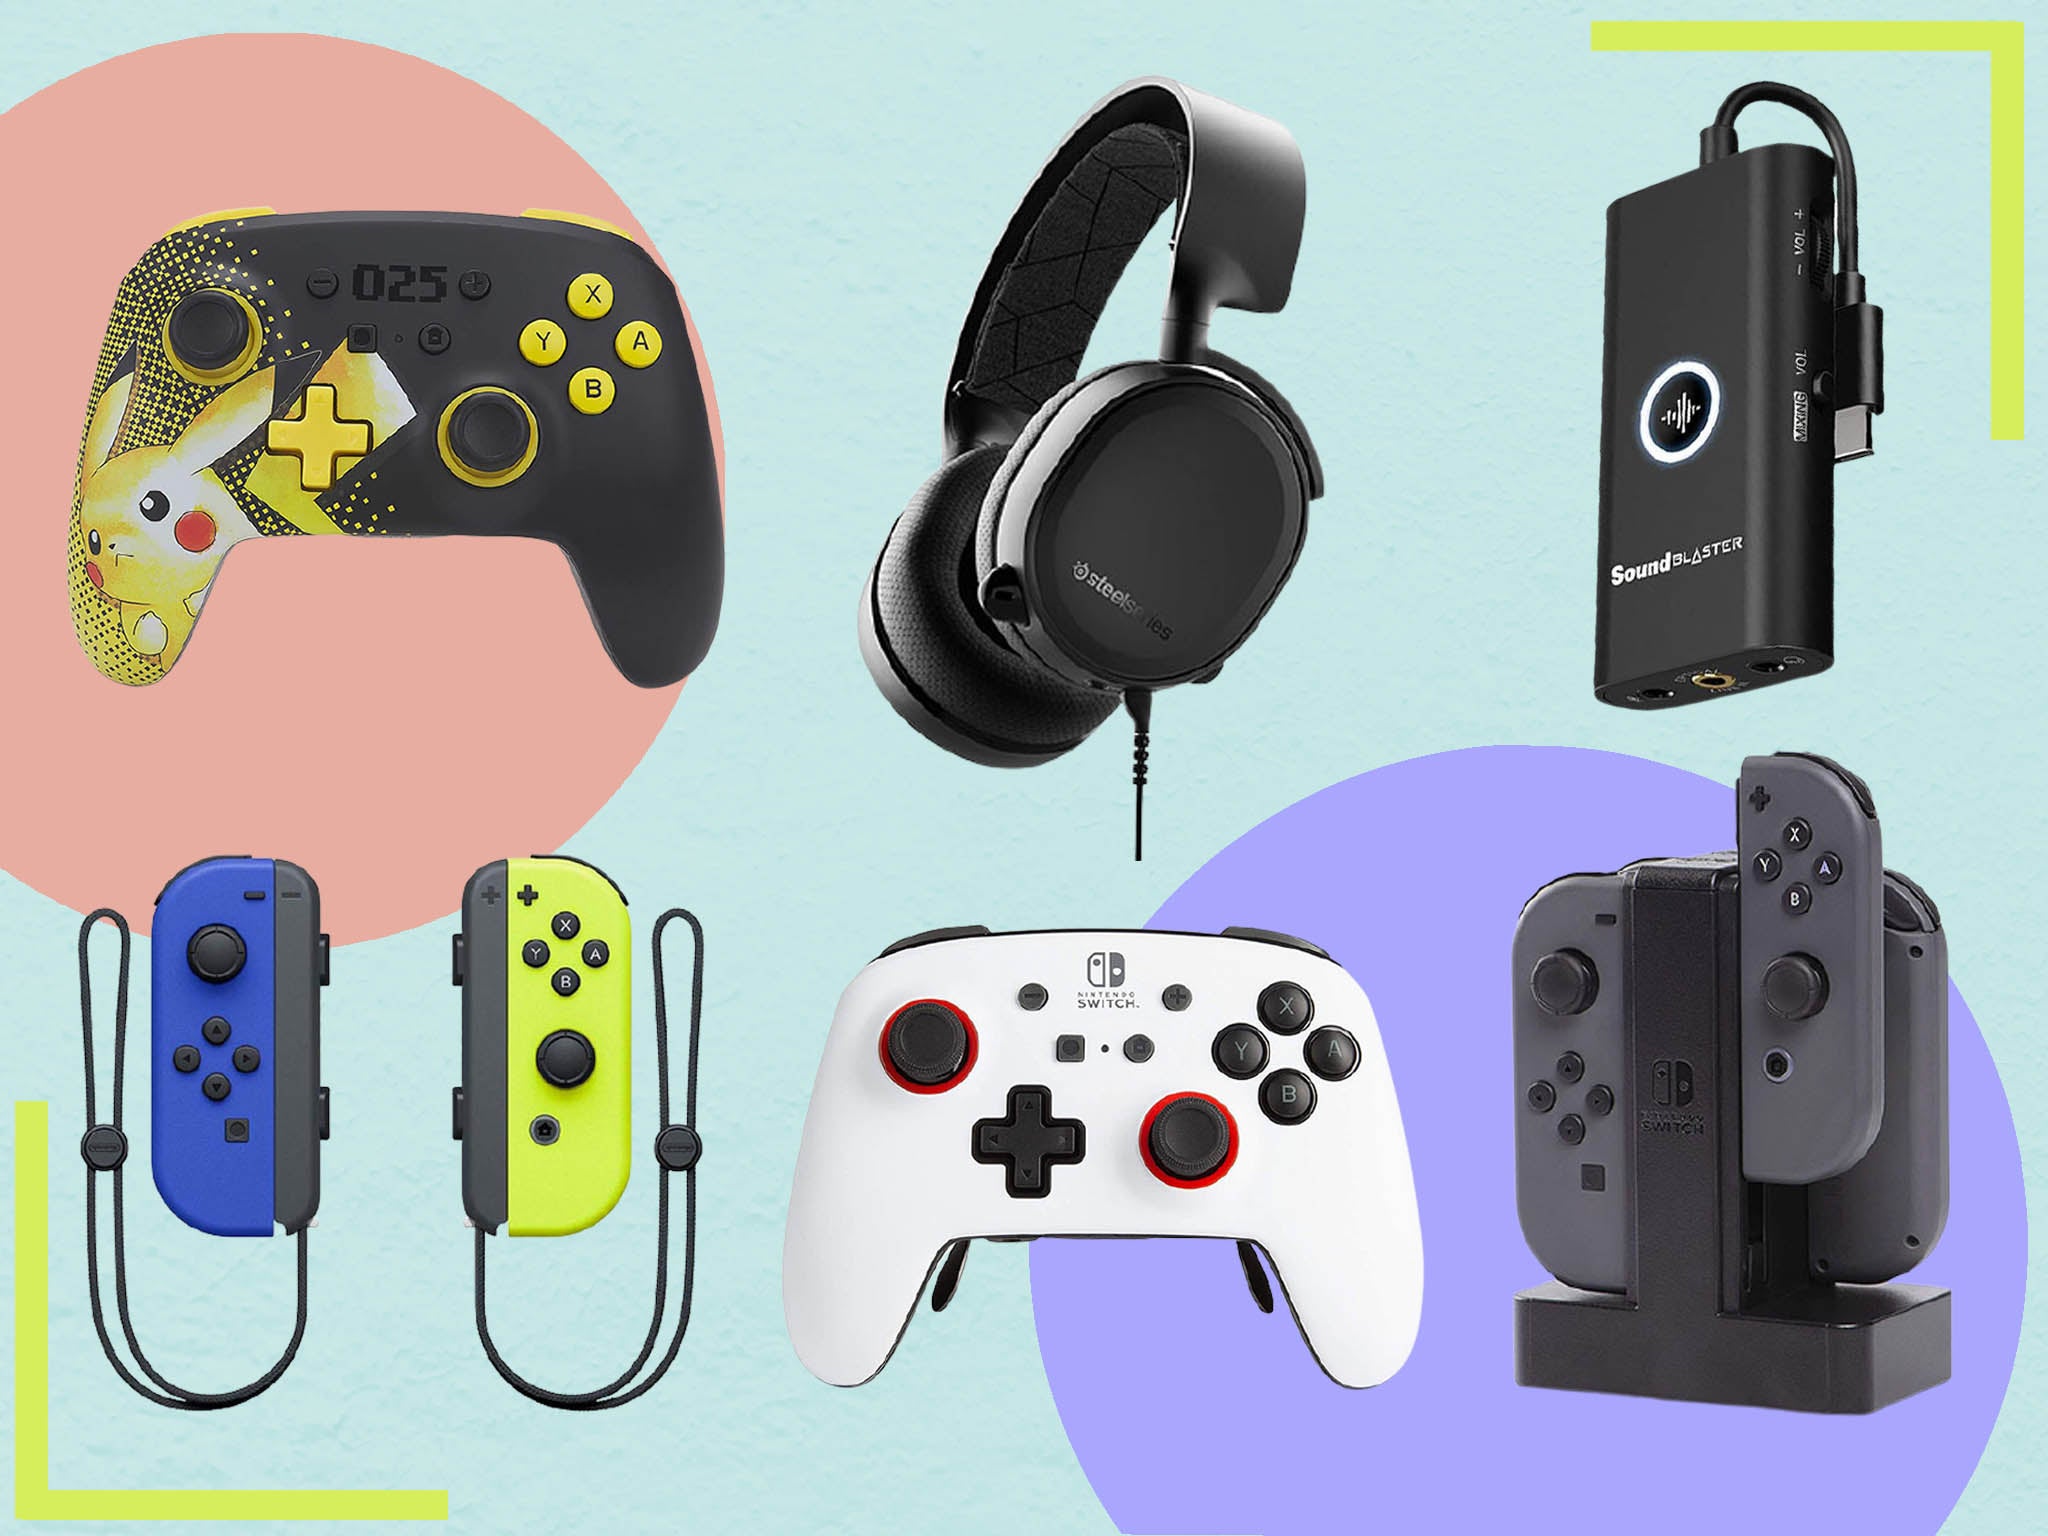 https://static.independent.co.uk/2021/07/23/09/Nintendo%20switch%20accessories.jpg